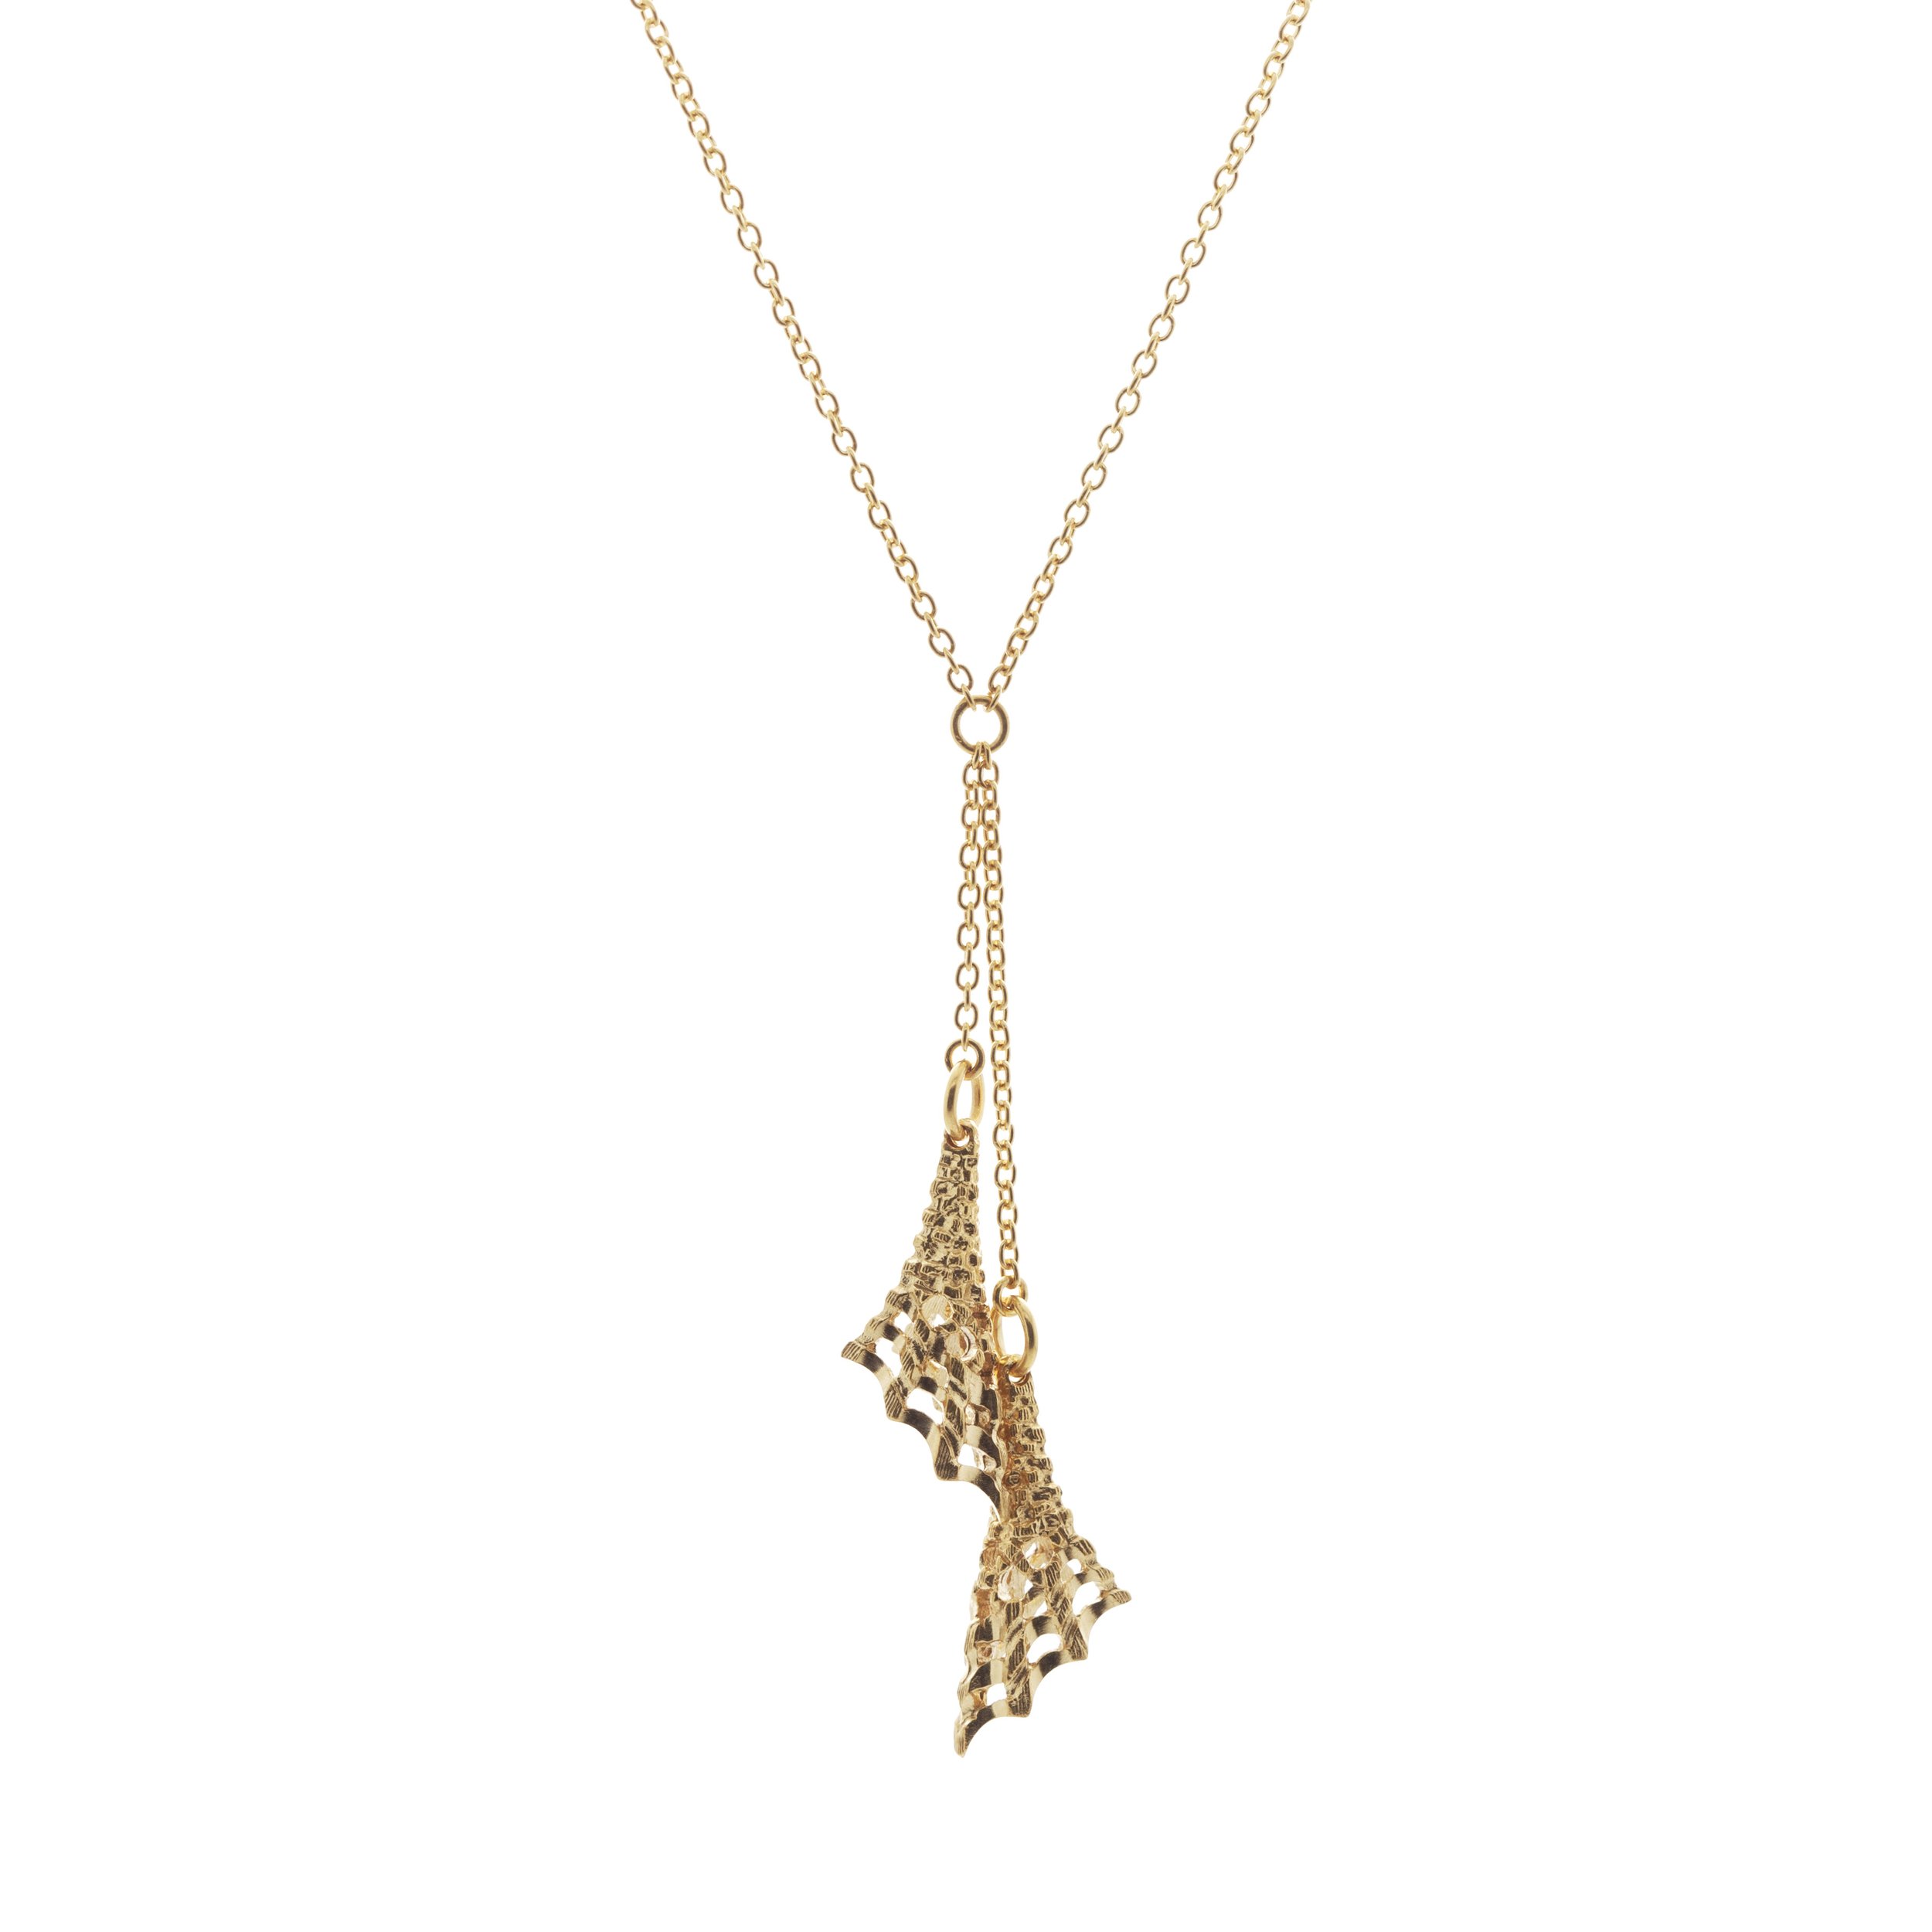 Double drop necklace in yellow gold